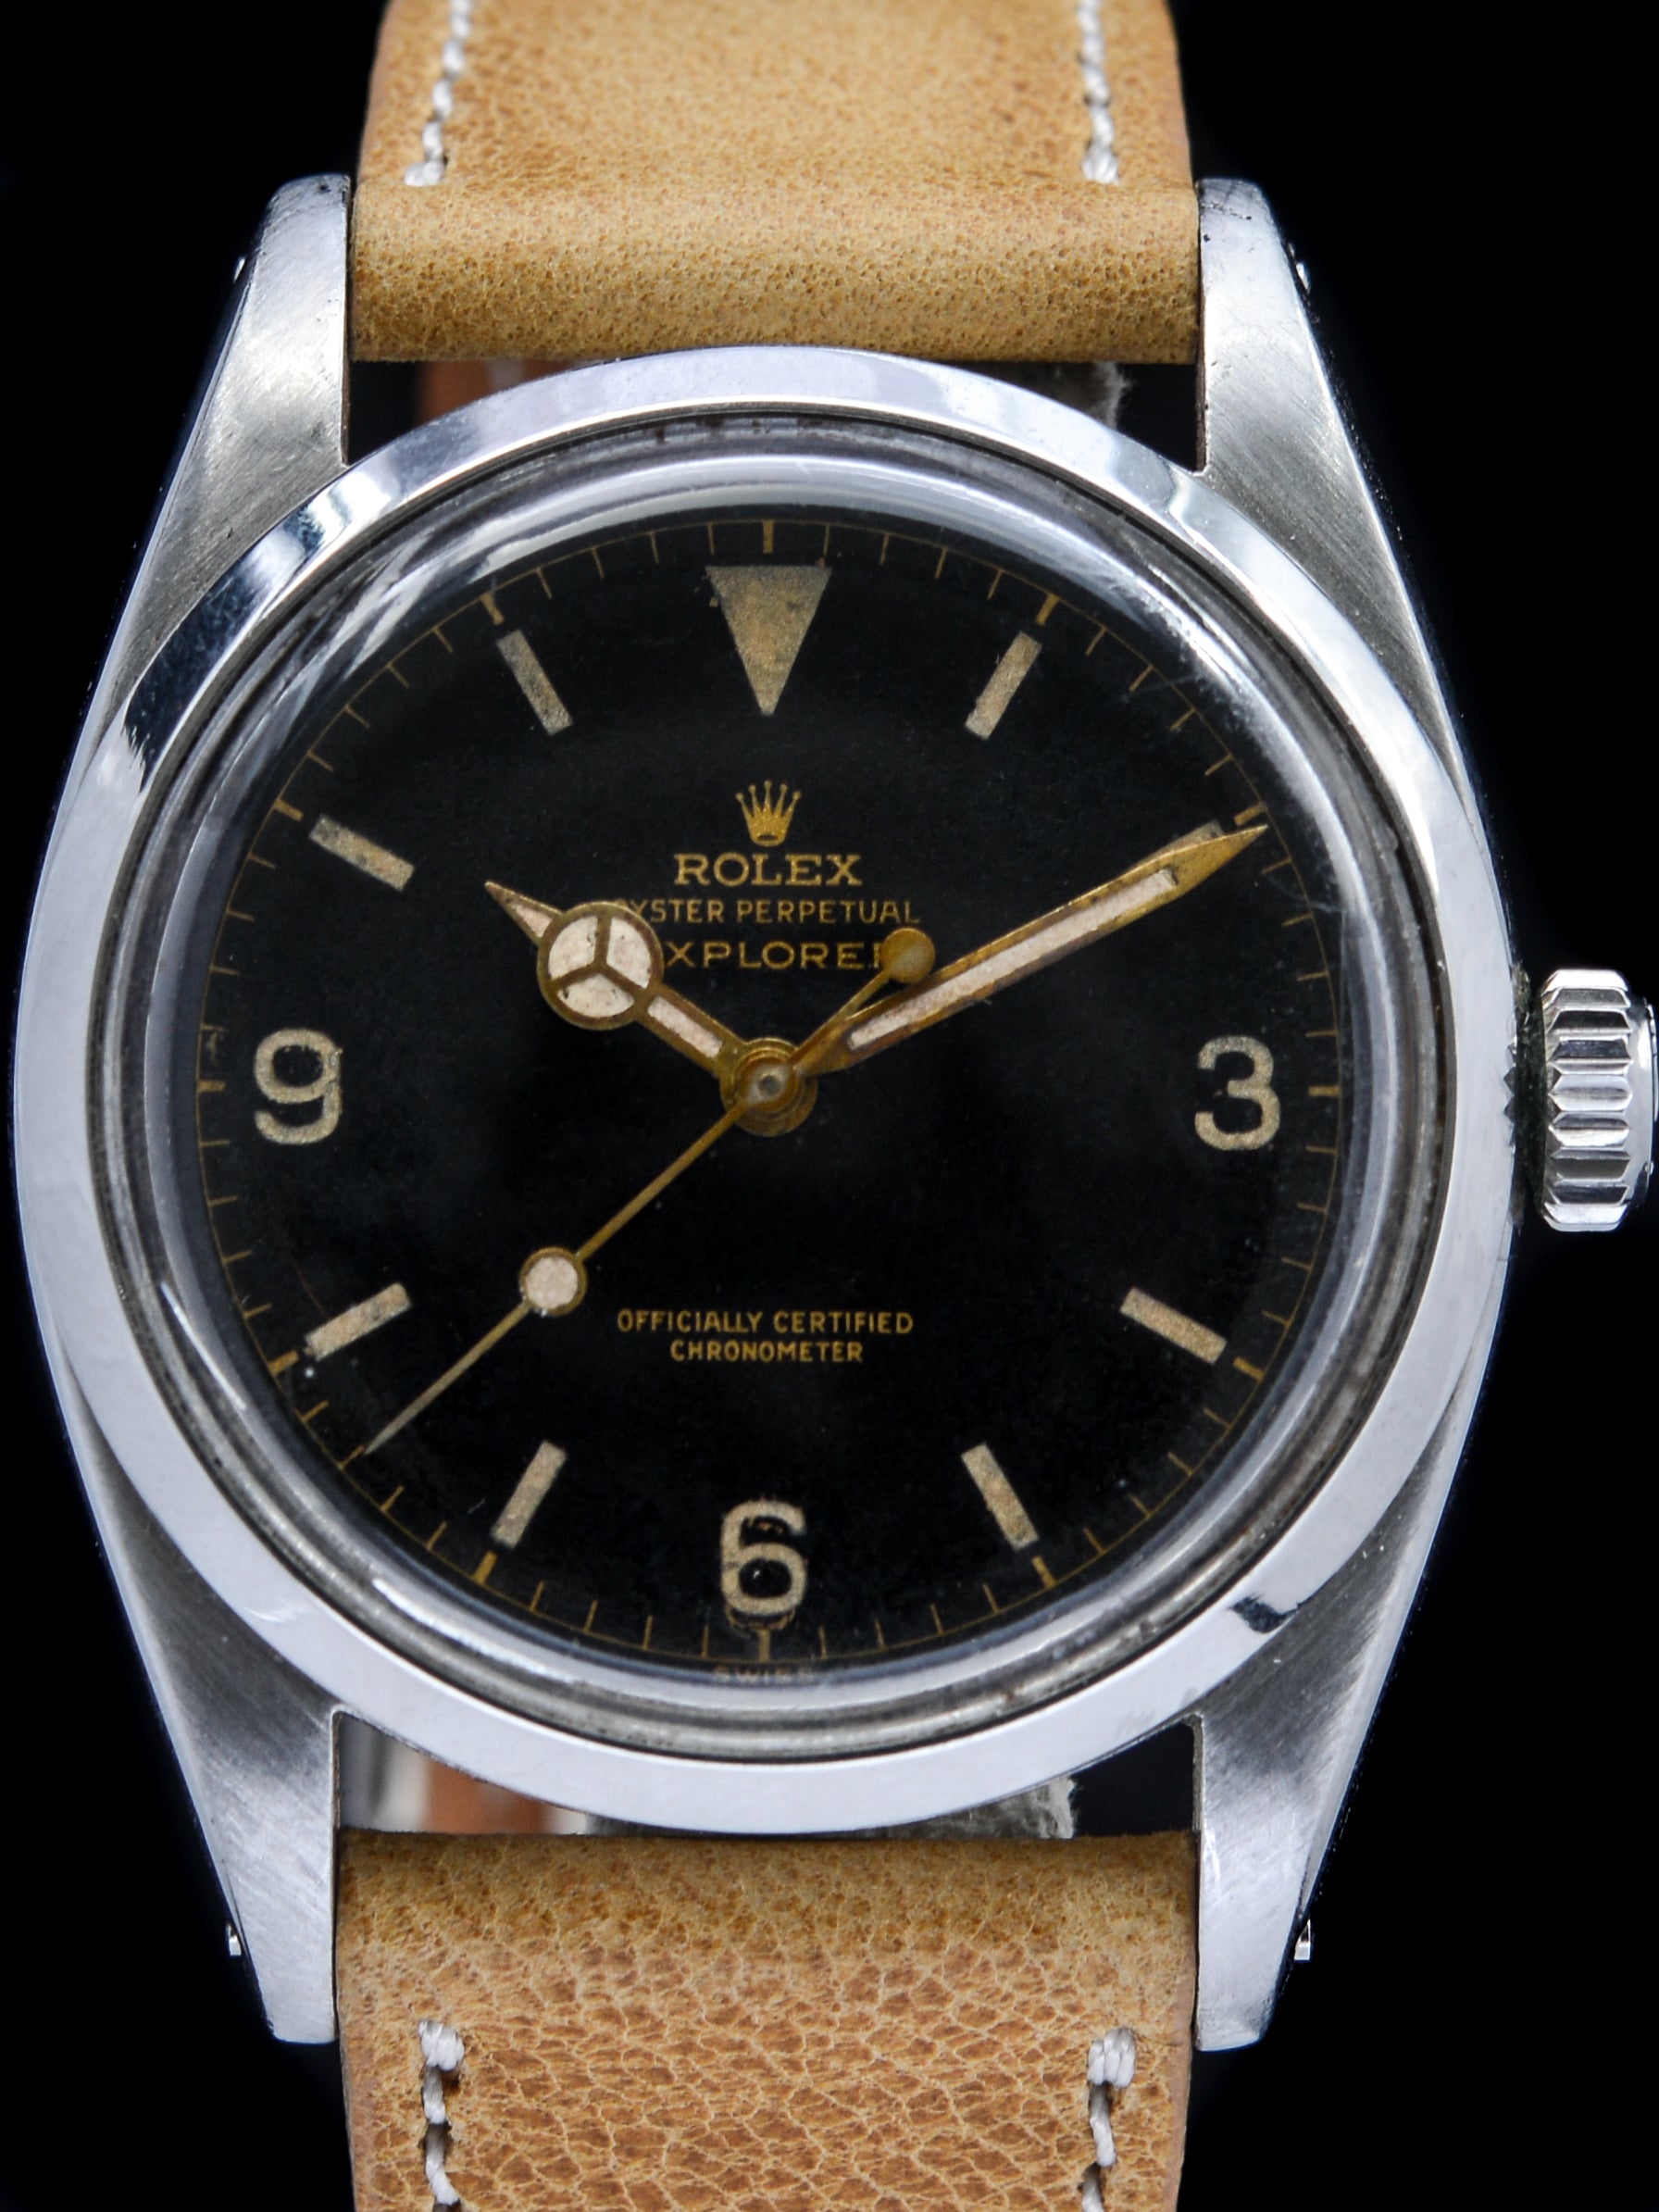 1956 Rolex Explorer I (Ref. 6610) "SWISS only" Chapter Ring